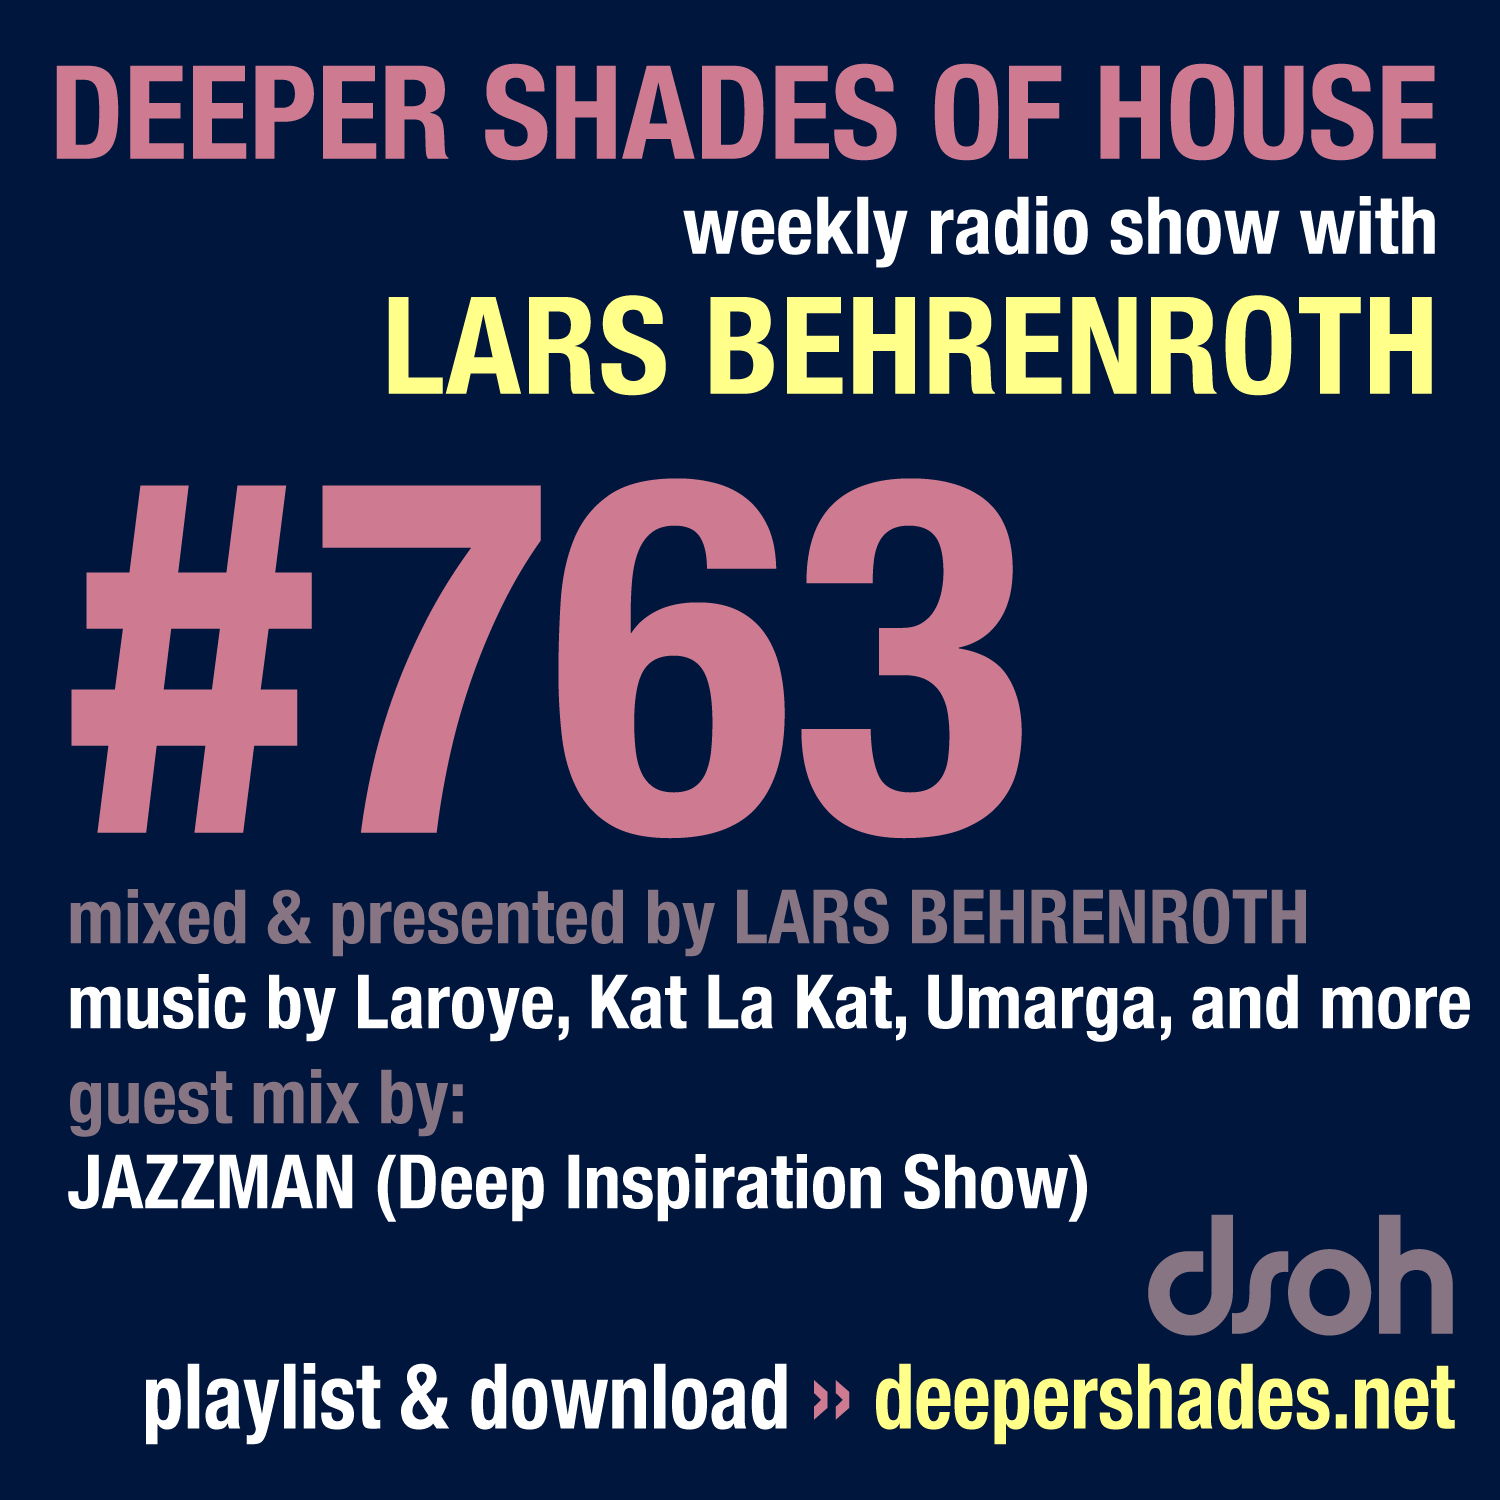 Deeper Shades Of House #763 – guest mix by JAZZMAN